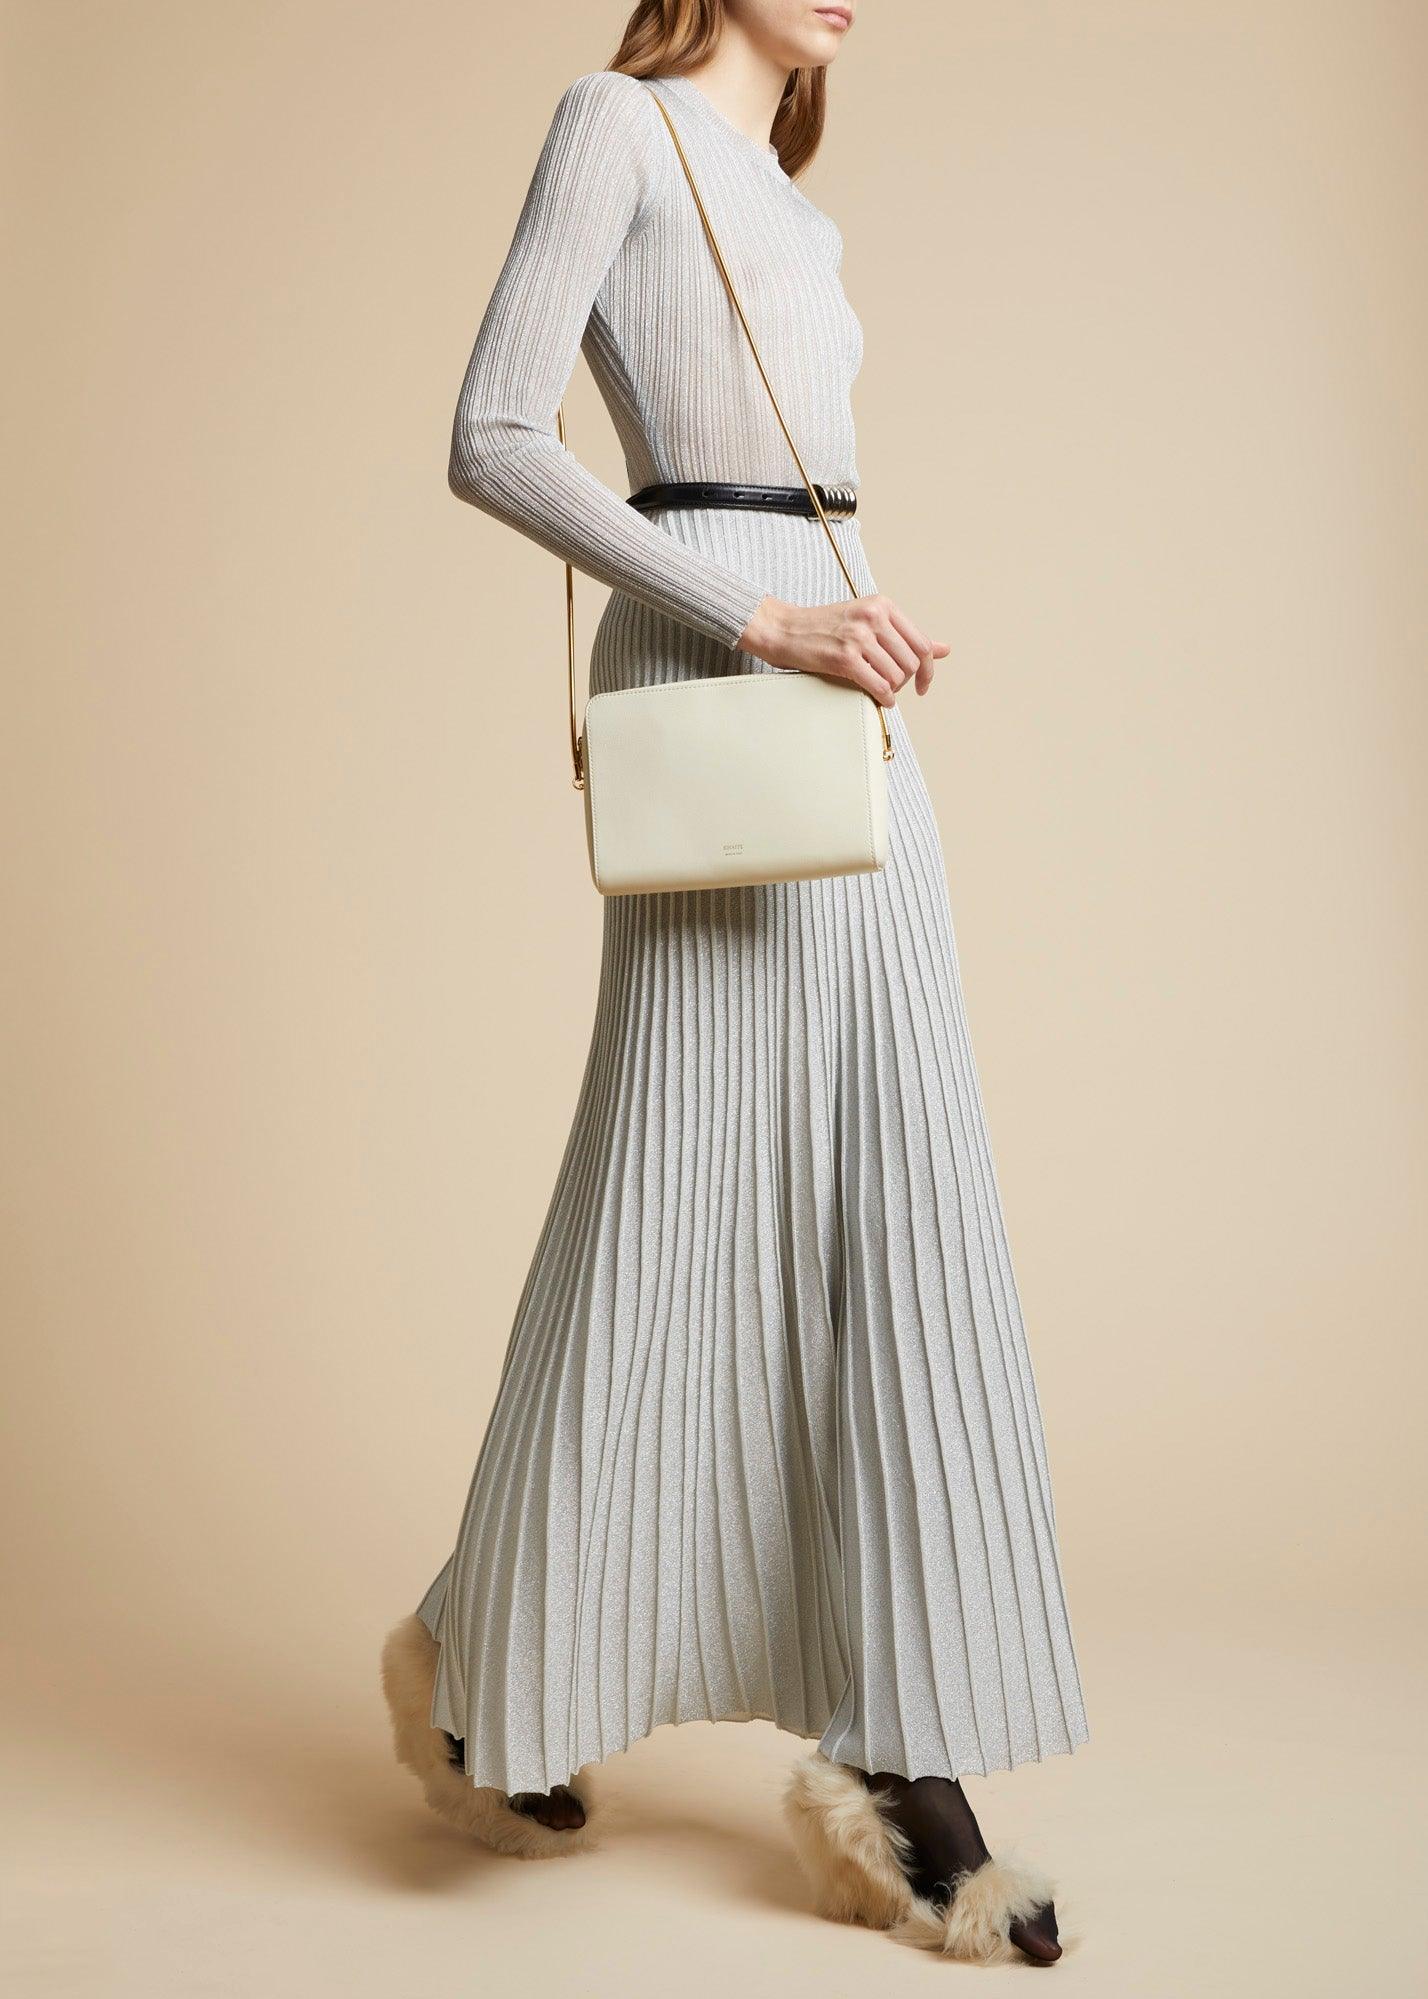 The Anna Crossbody Bag in Ivory Leather - The Iconic Issue